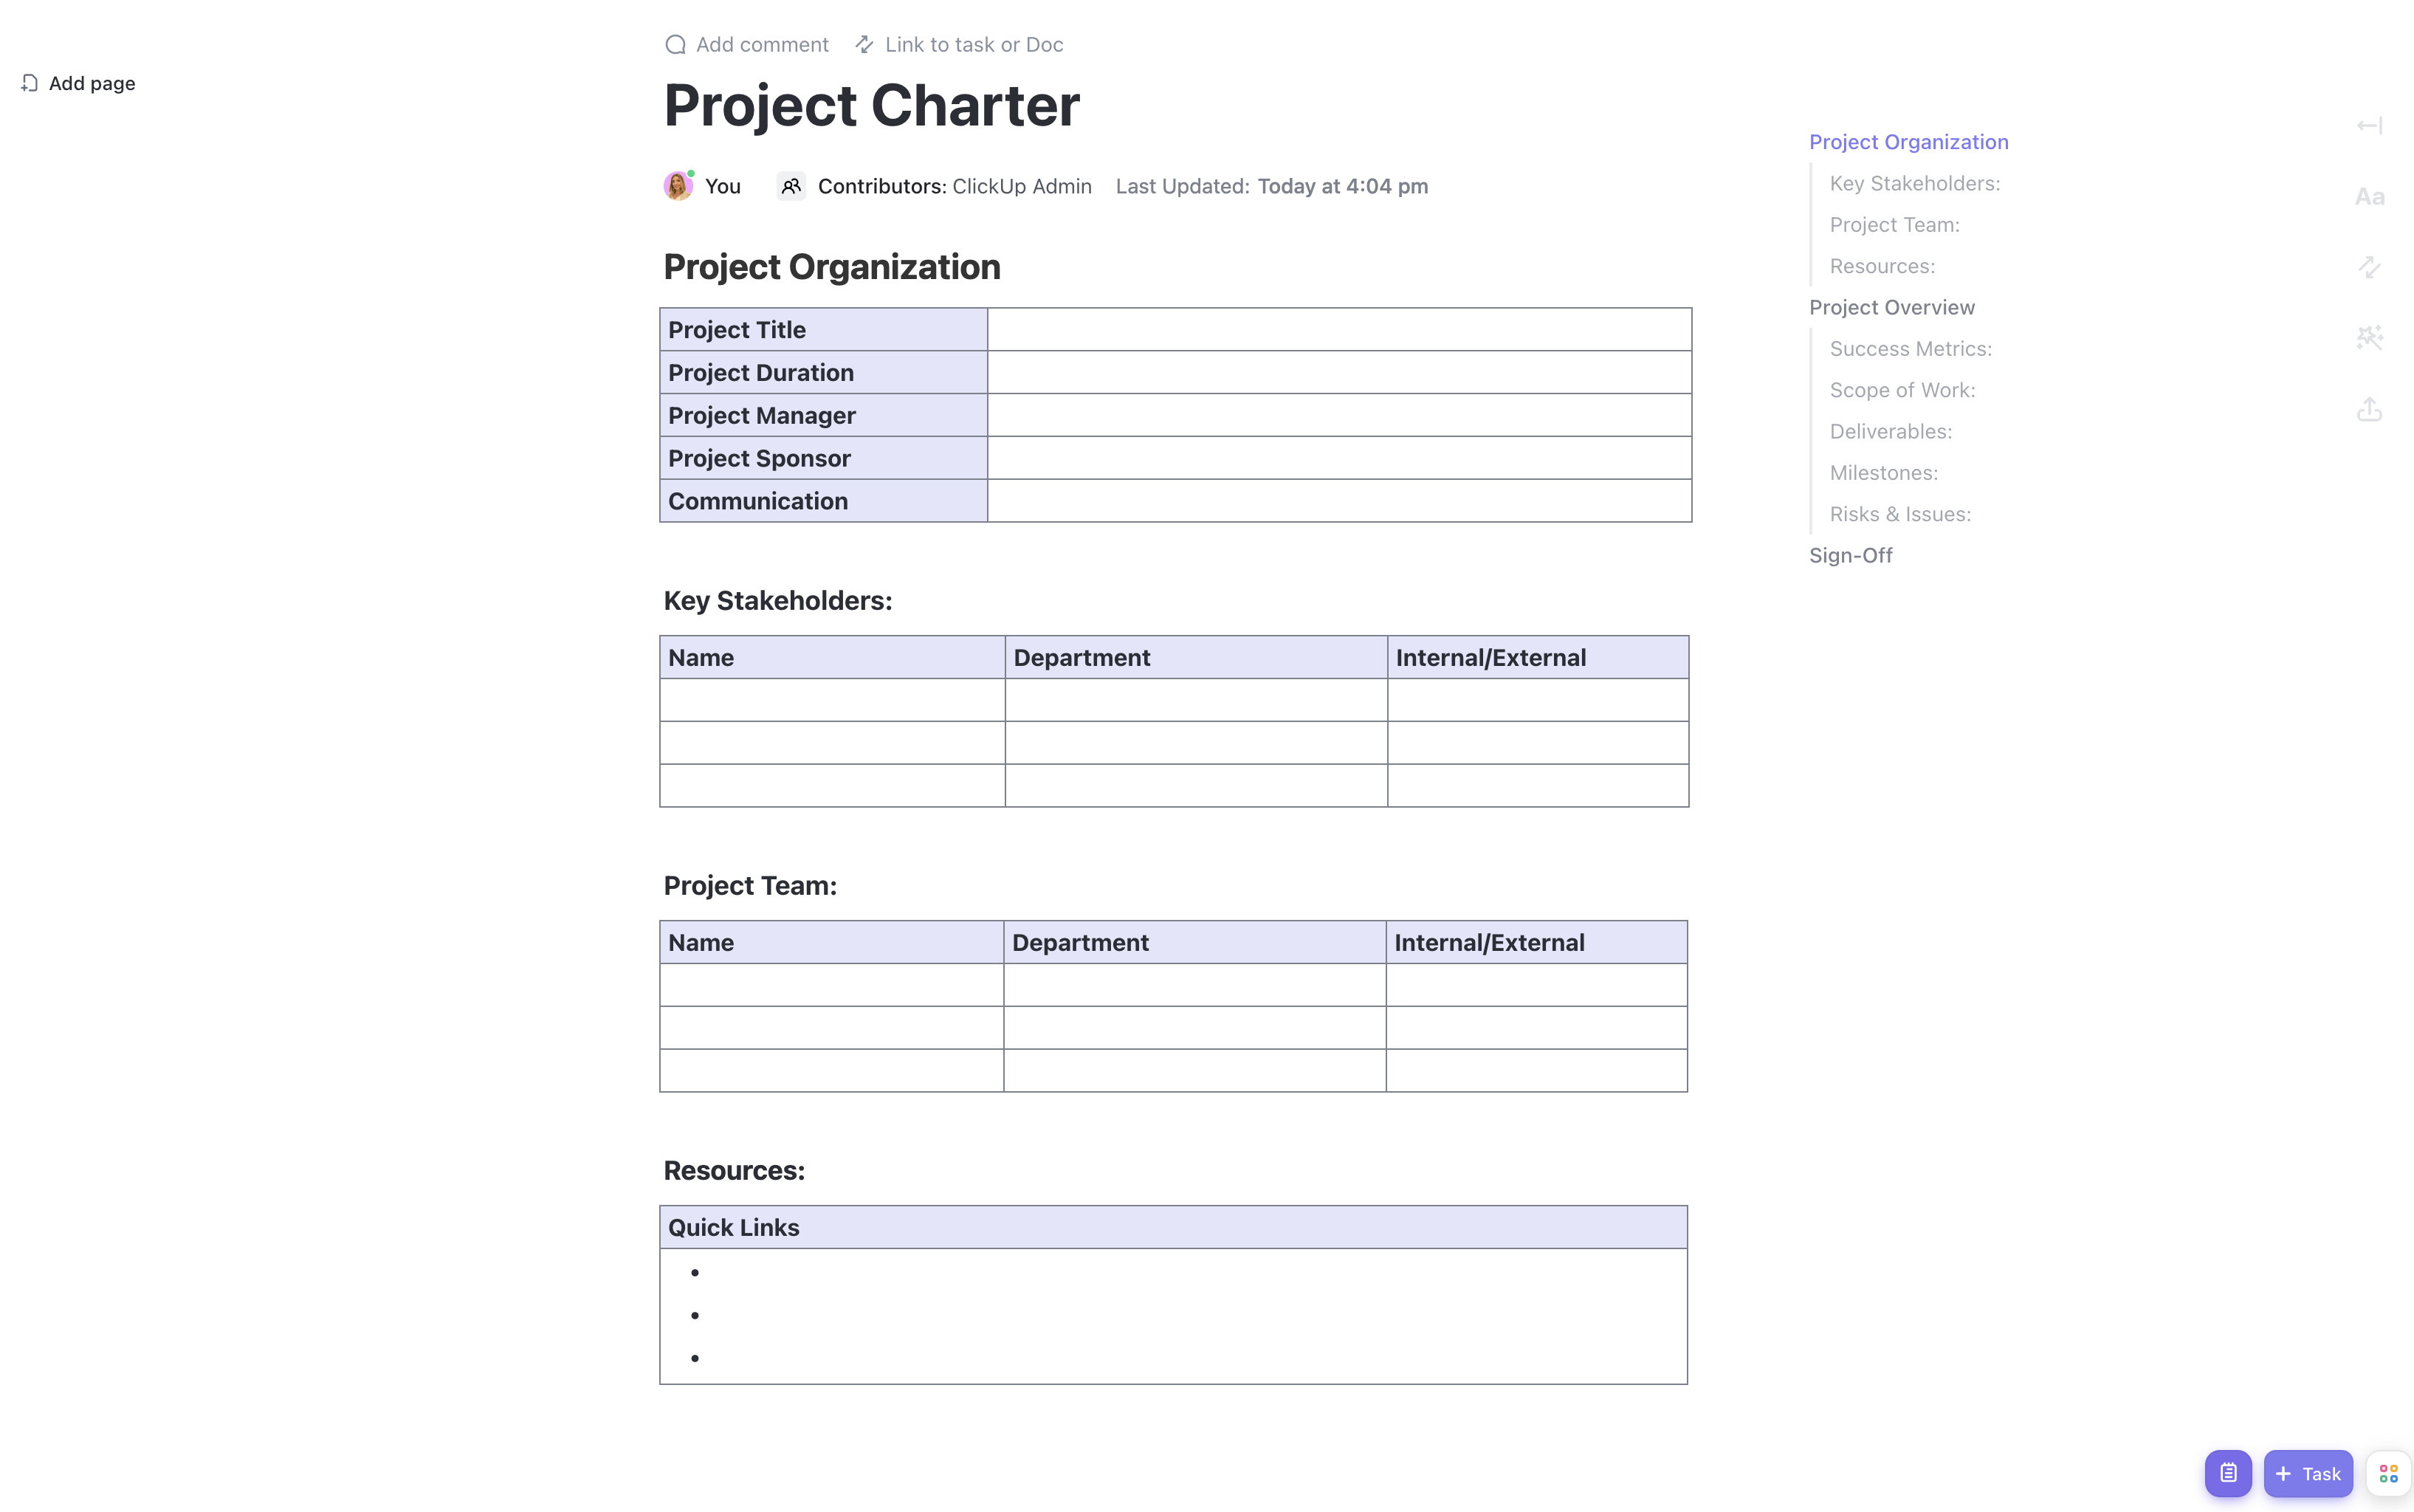 ClickUp Career Fair Project Charter Template